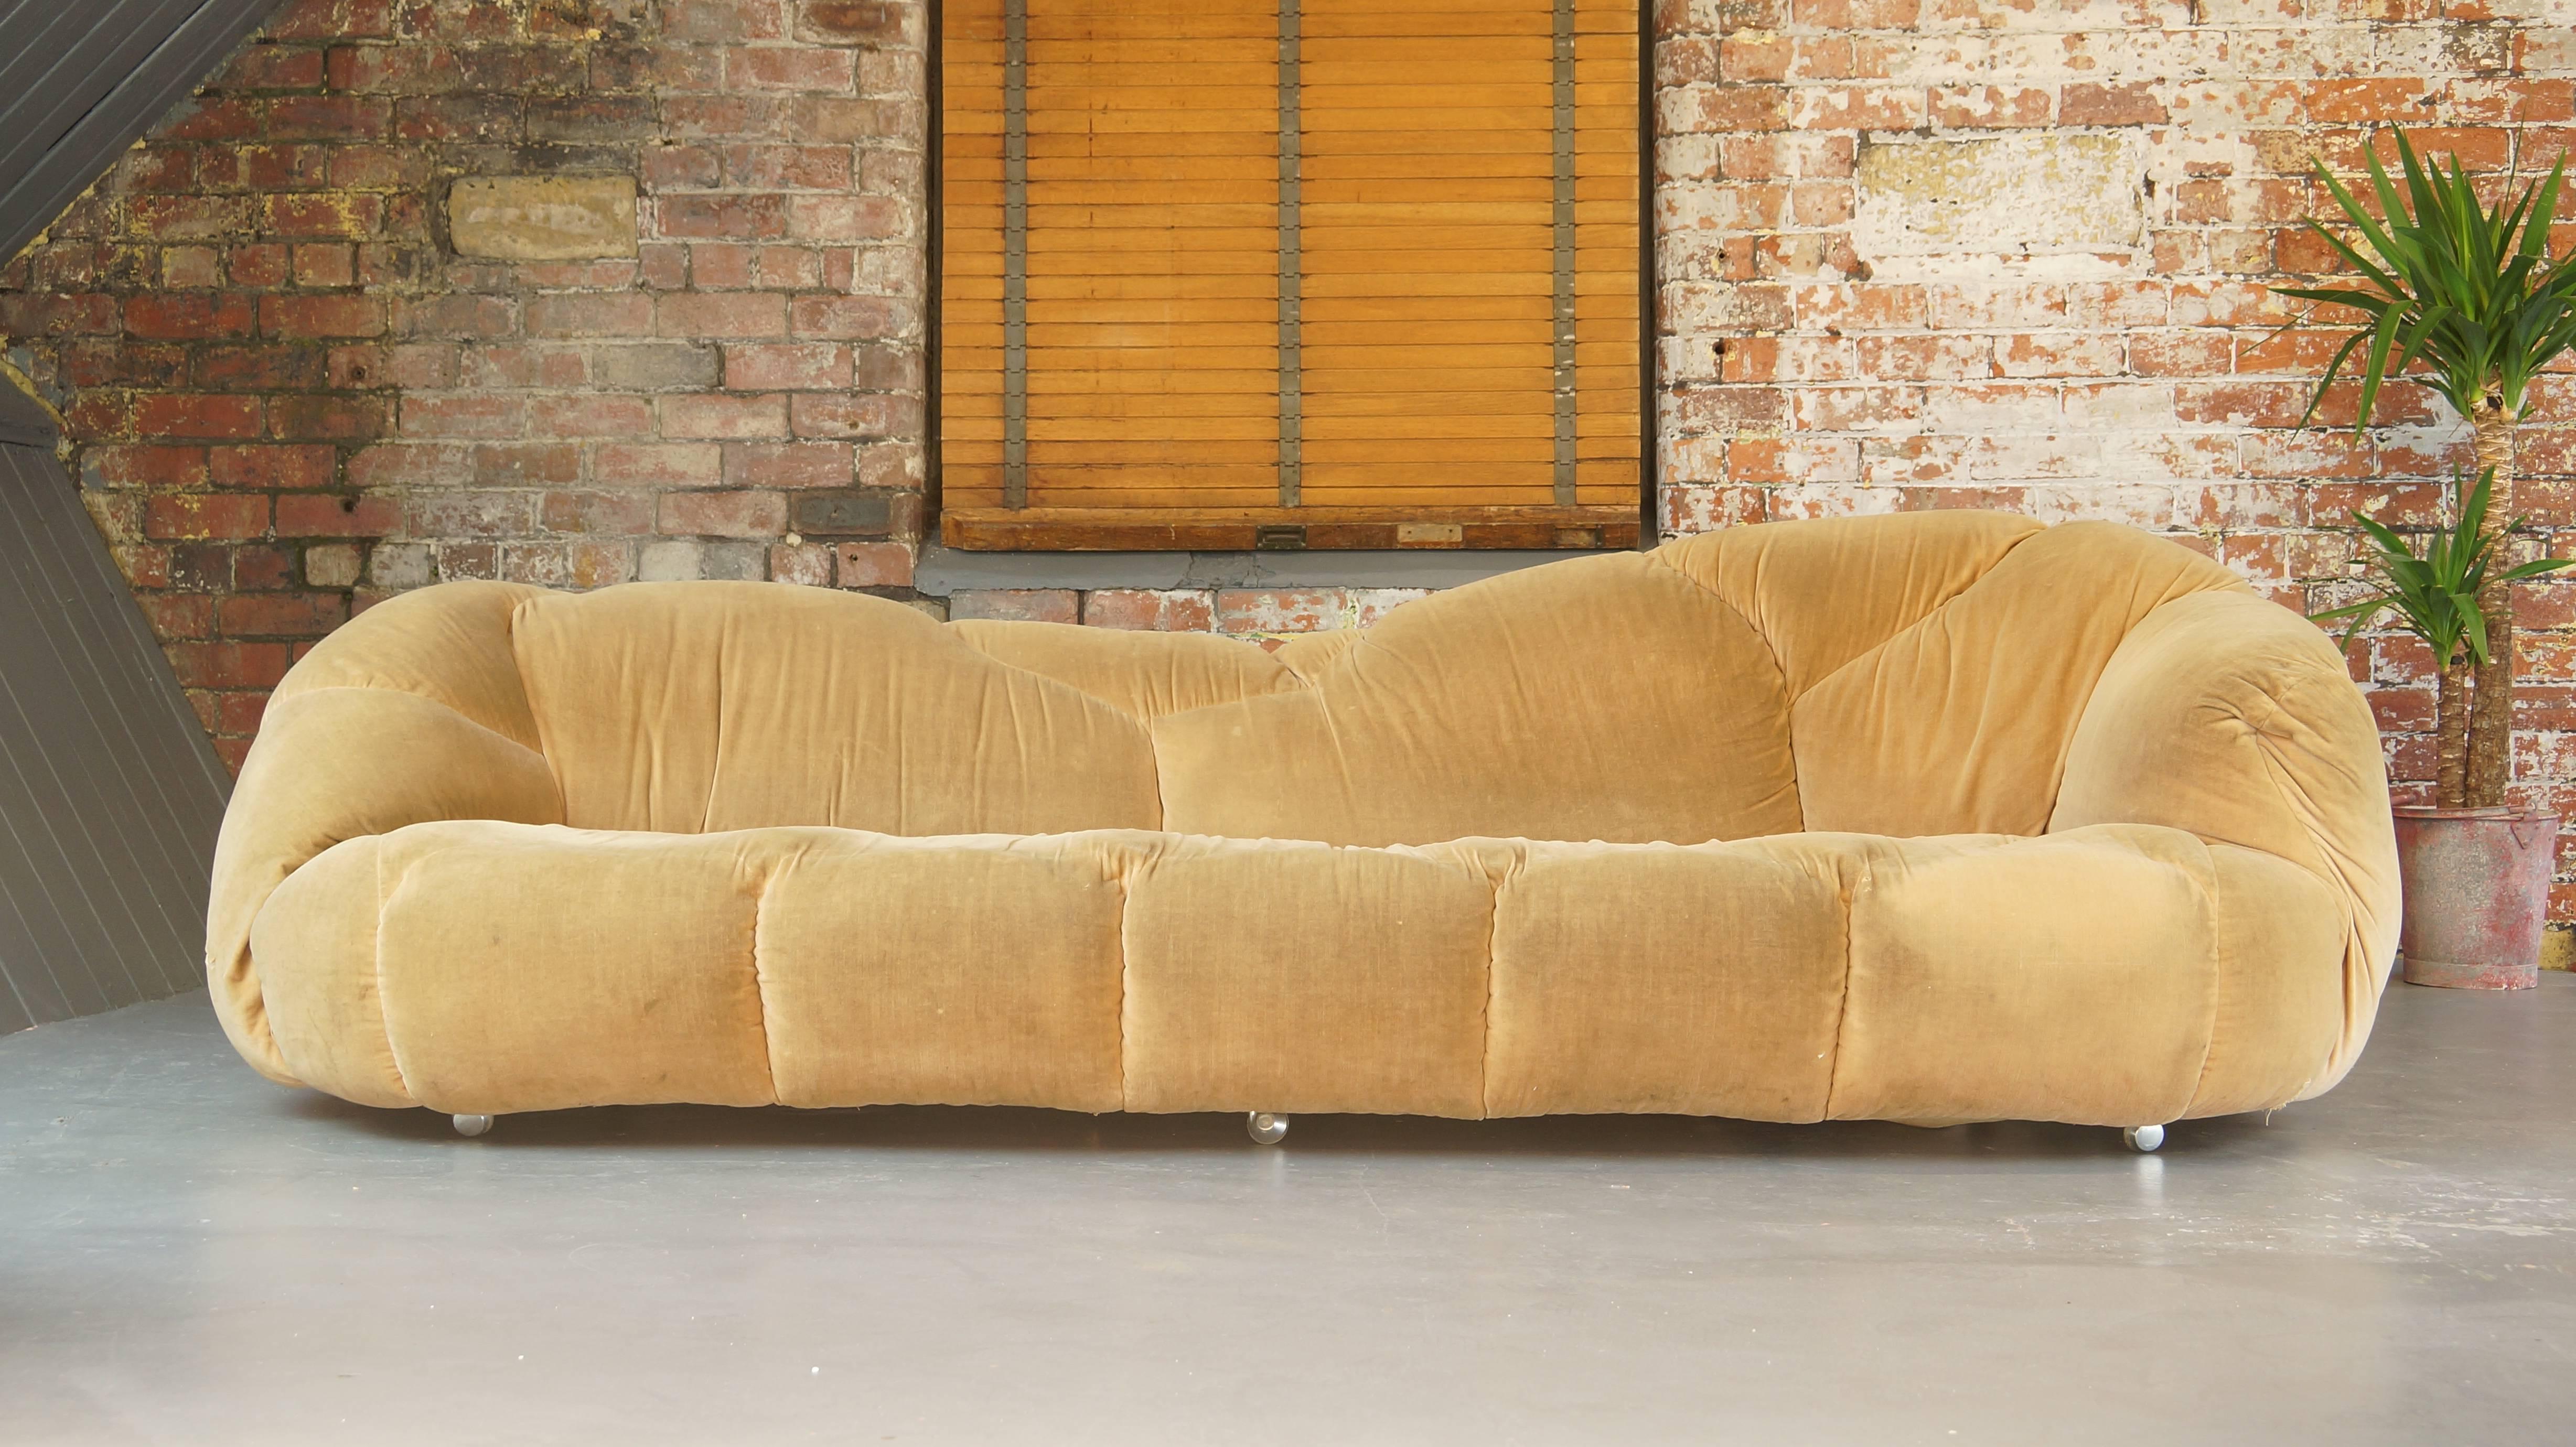 Large vintage HK cloud sofa, chaise longue or chaise Longue 
Designed by Howard Keith - London, England, 1970s

Unique and bold cloud design with large, sumptuous seating.

Offered in good vintage condition with three small rips to the upholstery